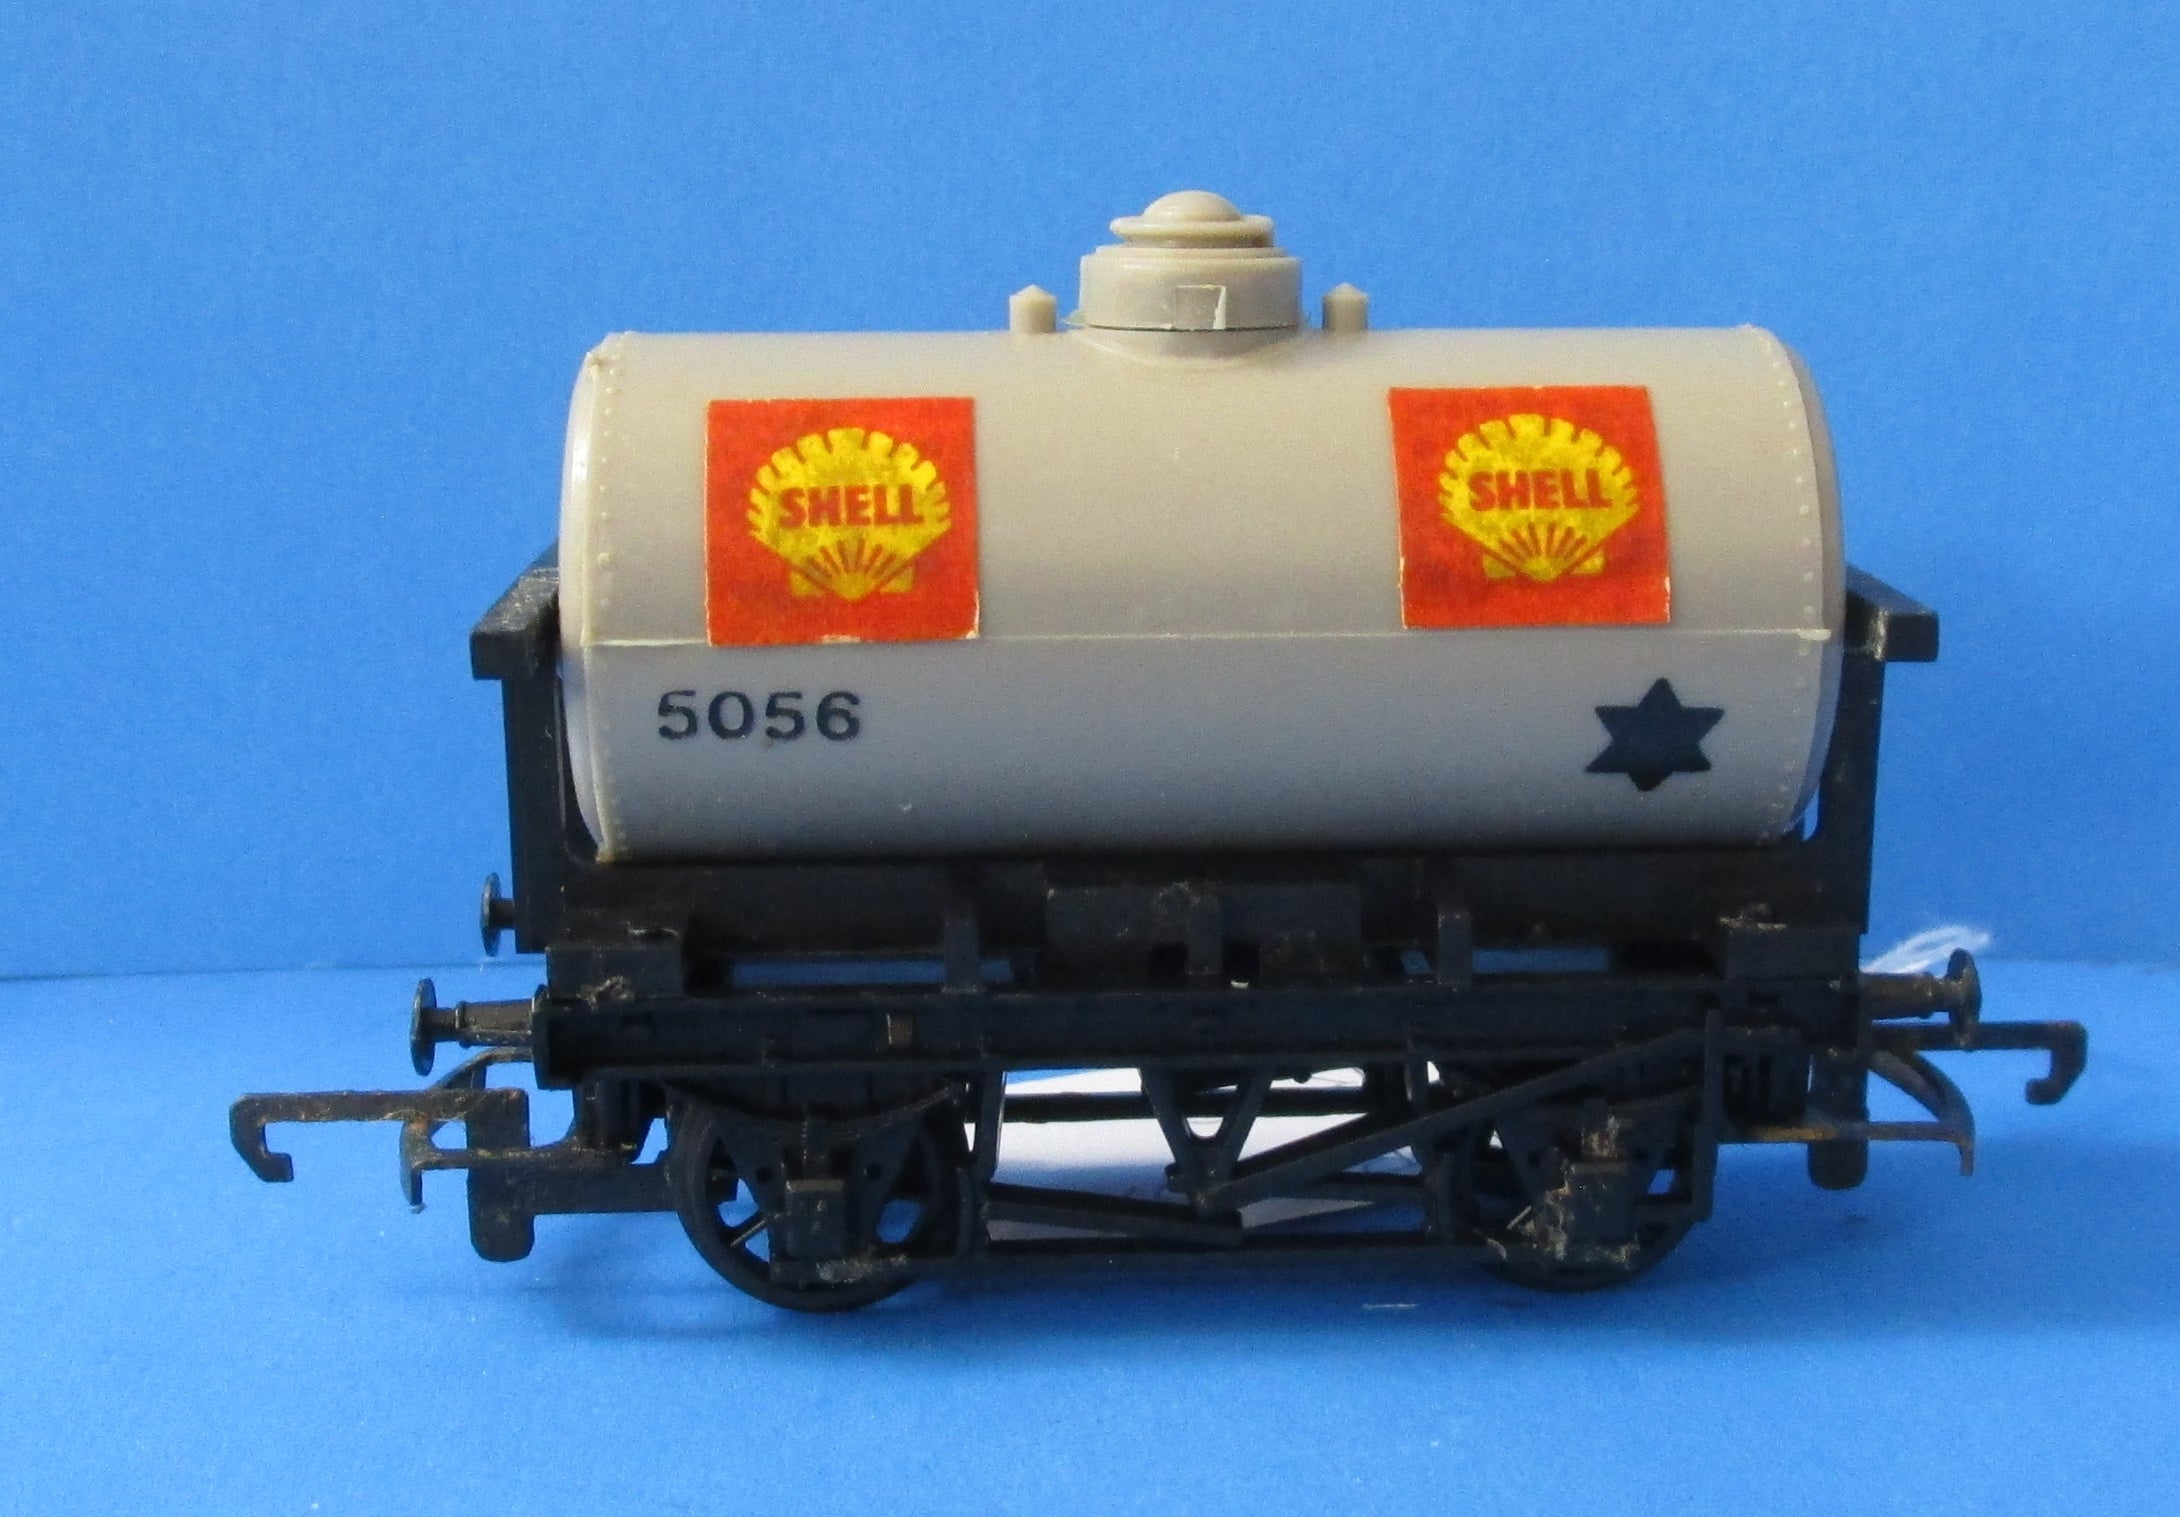 R12-P02 HORNBY Shell Petrol Tank Wagon 5056 - UNBOXED